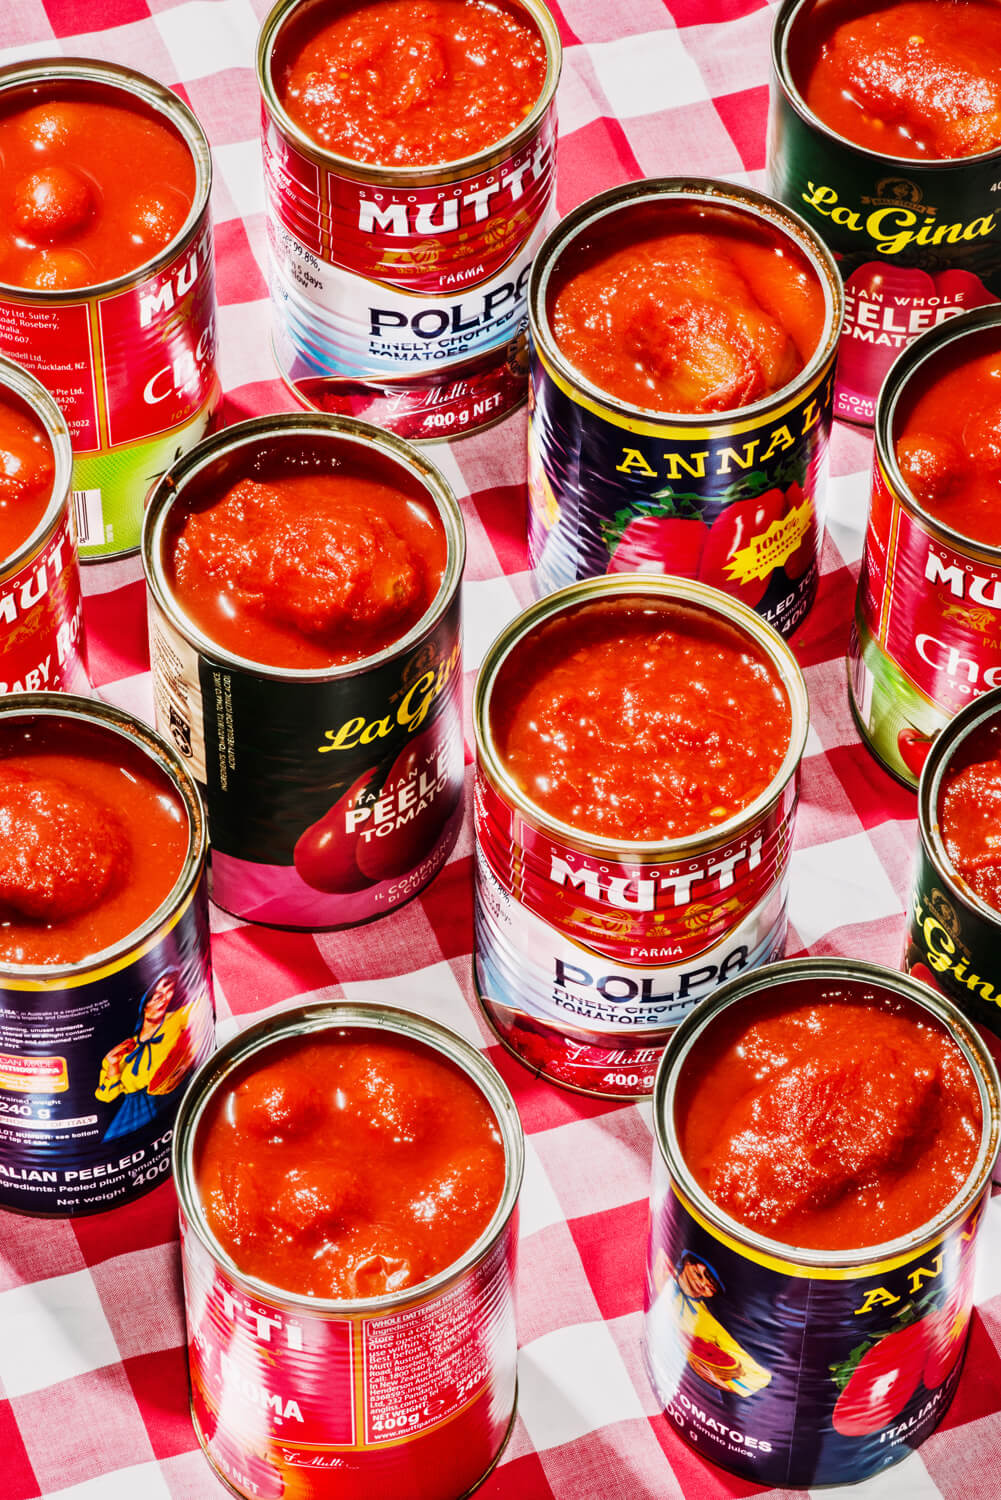 Various cans of tomato products, with vibrant labels, are open and arranged on a classic red and white chequered tablecloth, the rich red of the tomatoes standing out against the pattern, suggestive of preparation for a flavourful cooking session.